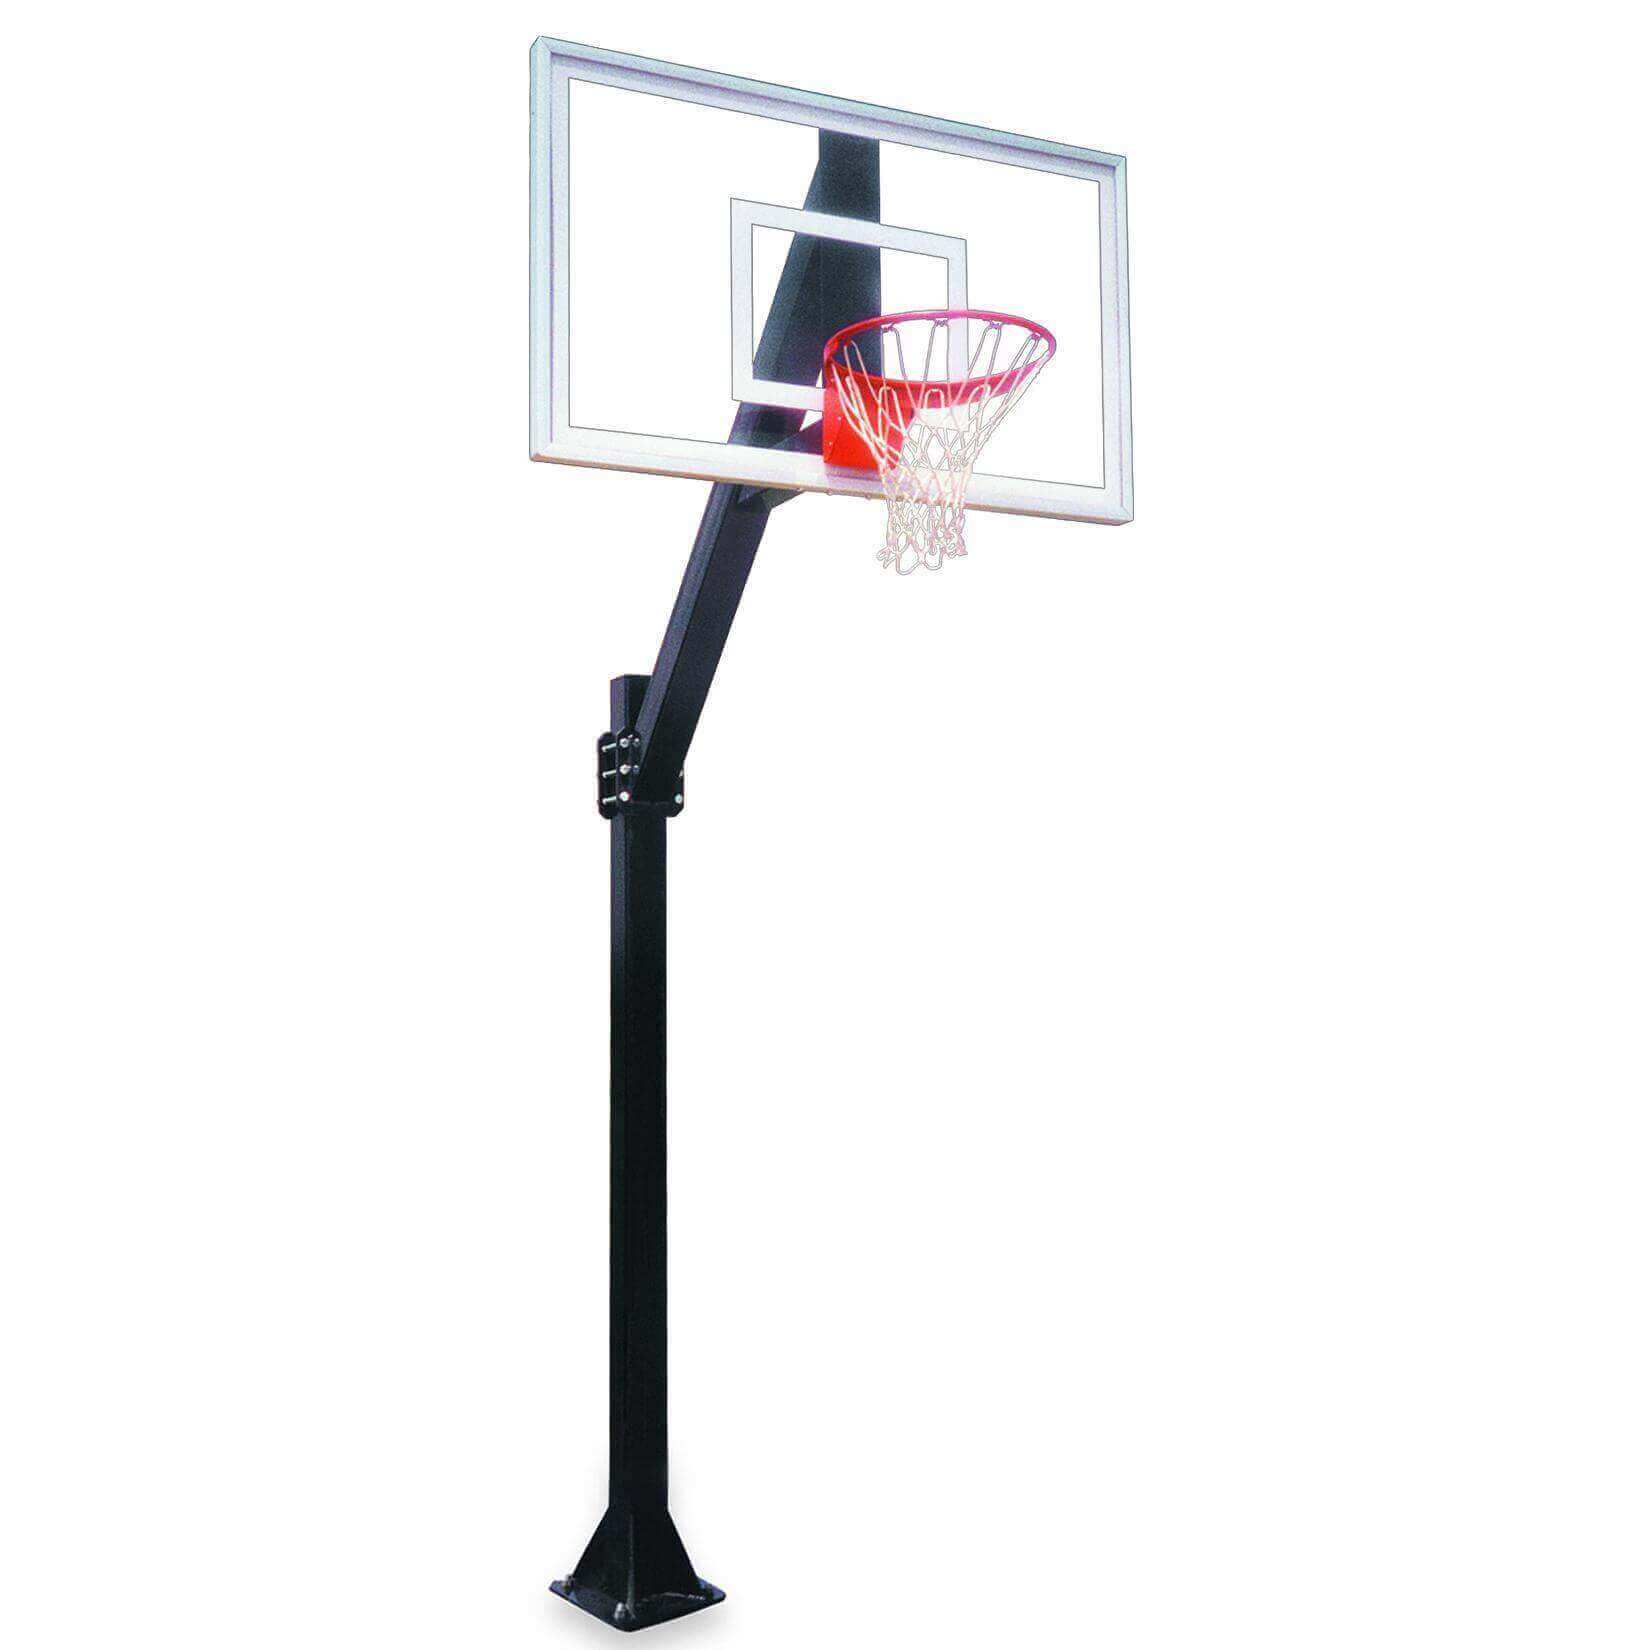 First Team Legend Jr. Series Of Fixed-Height In-Ground Hoops